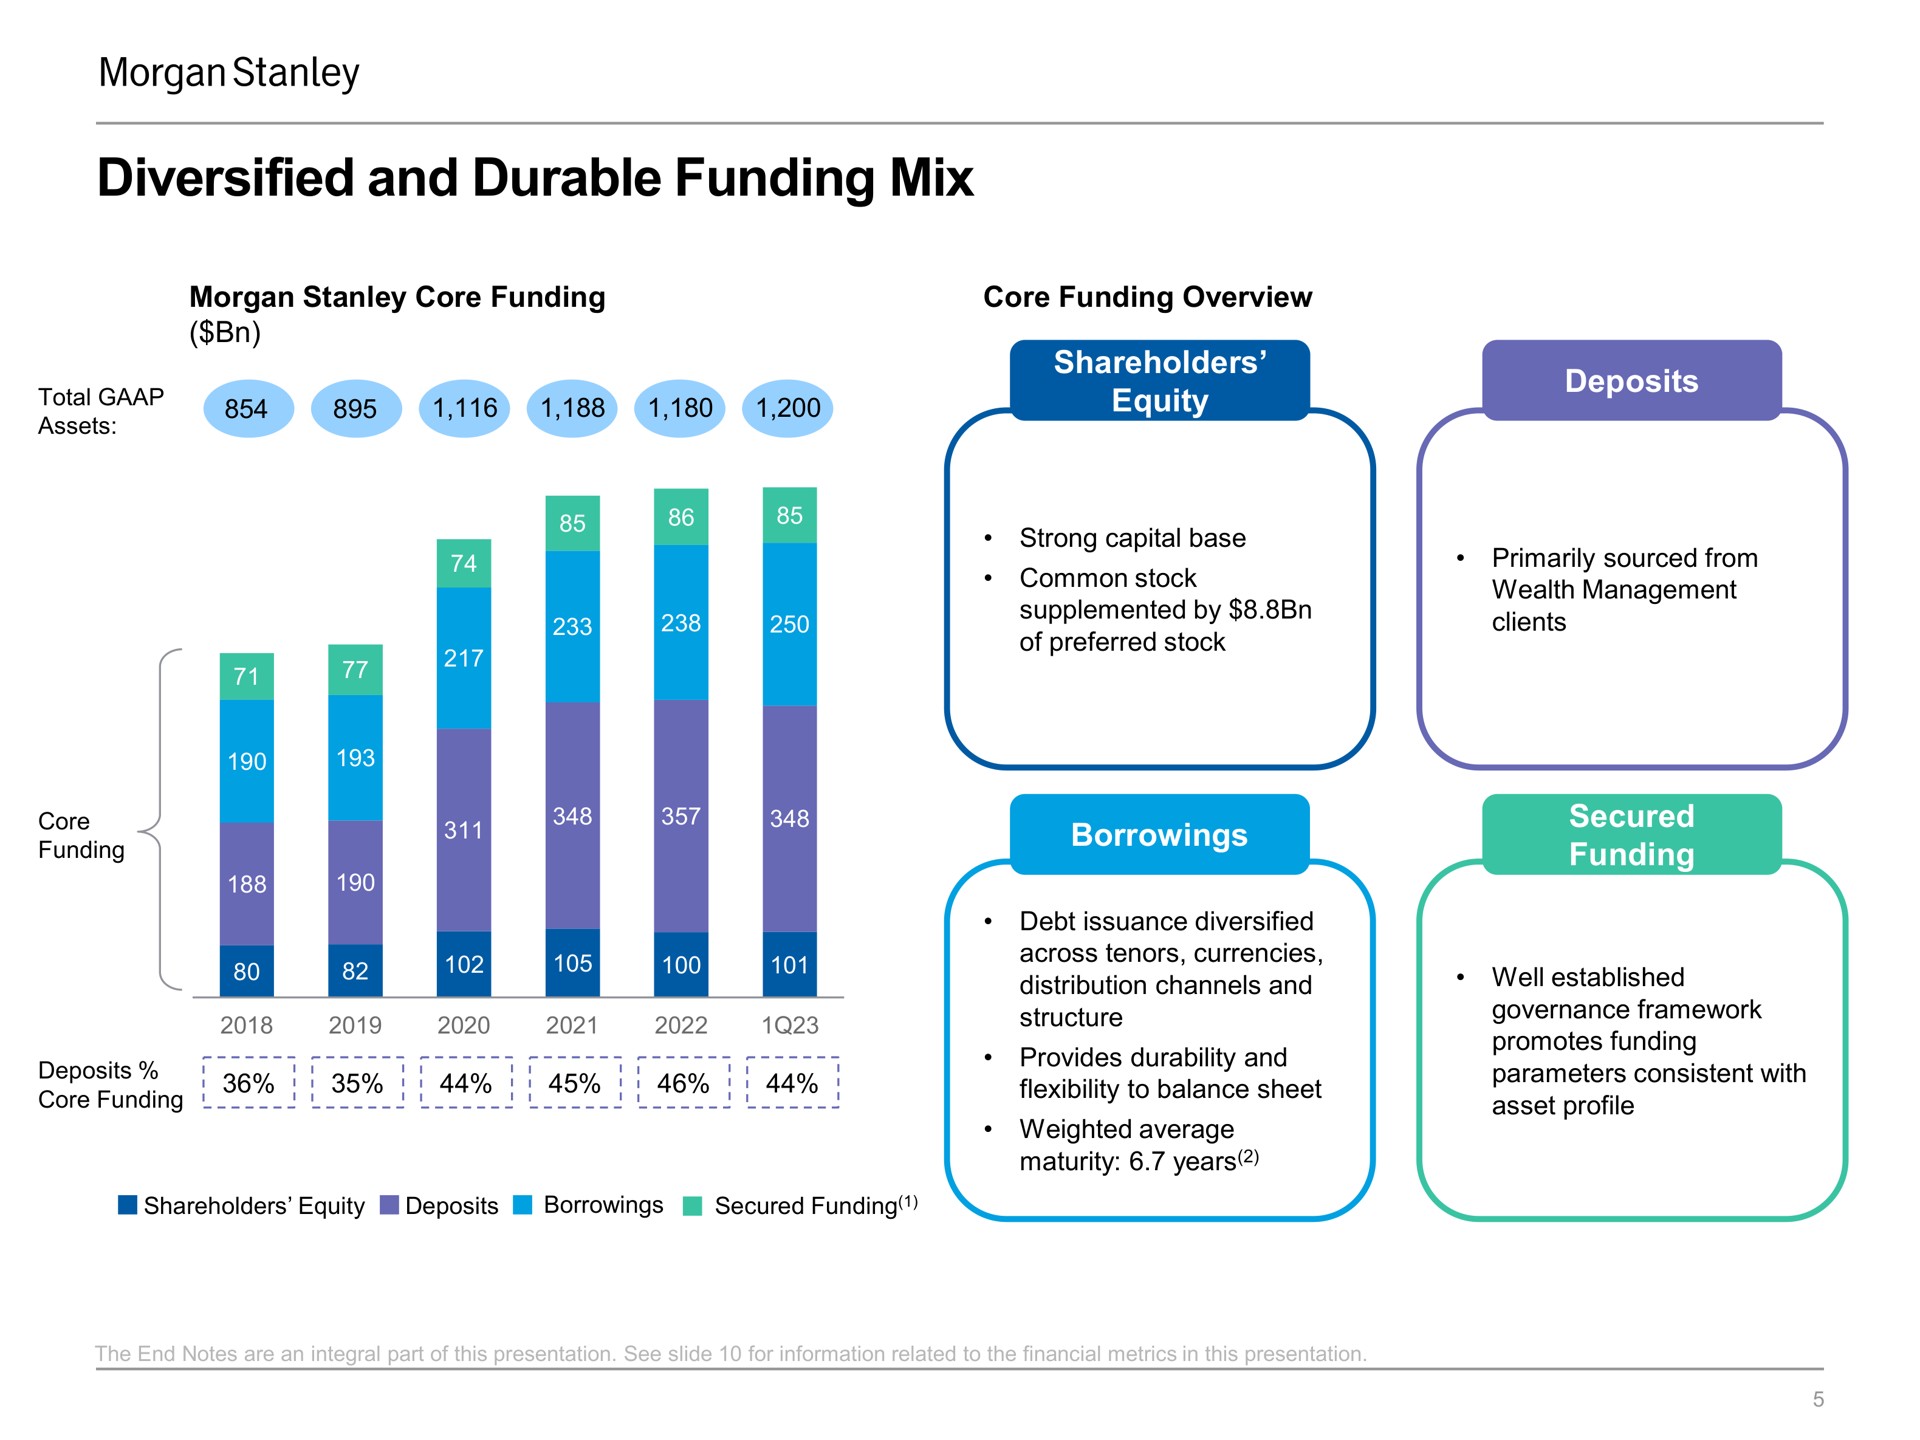 diversified and durable funding mix shareholders equity deposits borrowings secured funding | Morgan Stanley